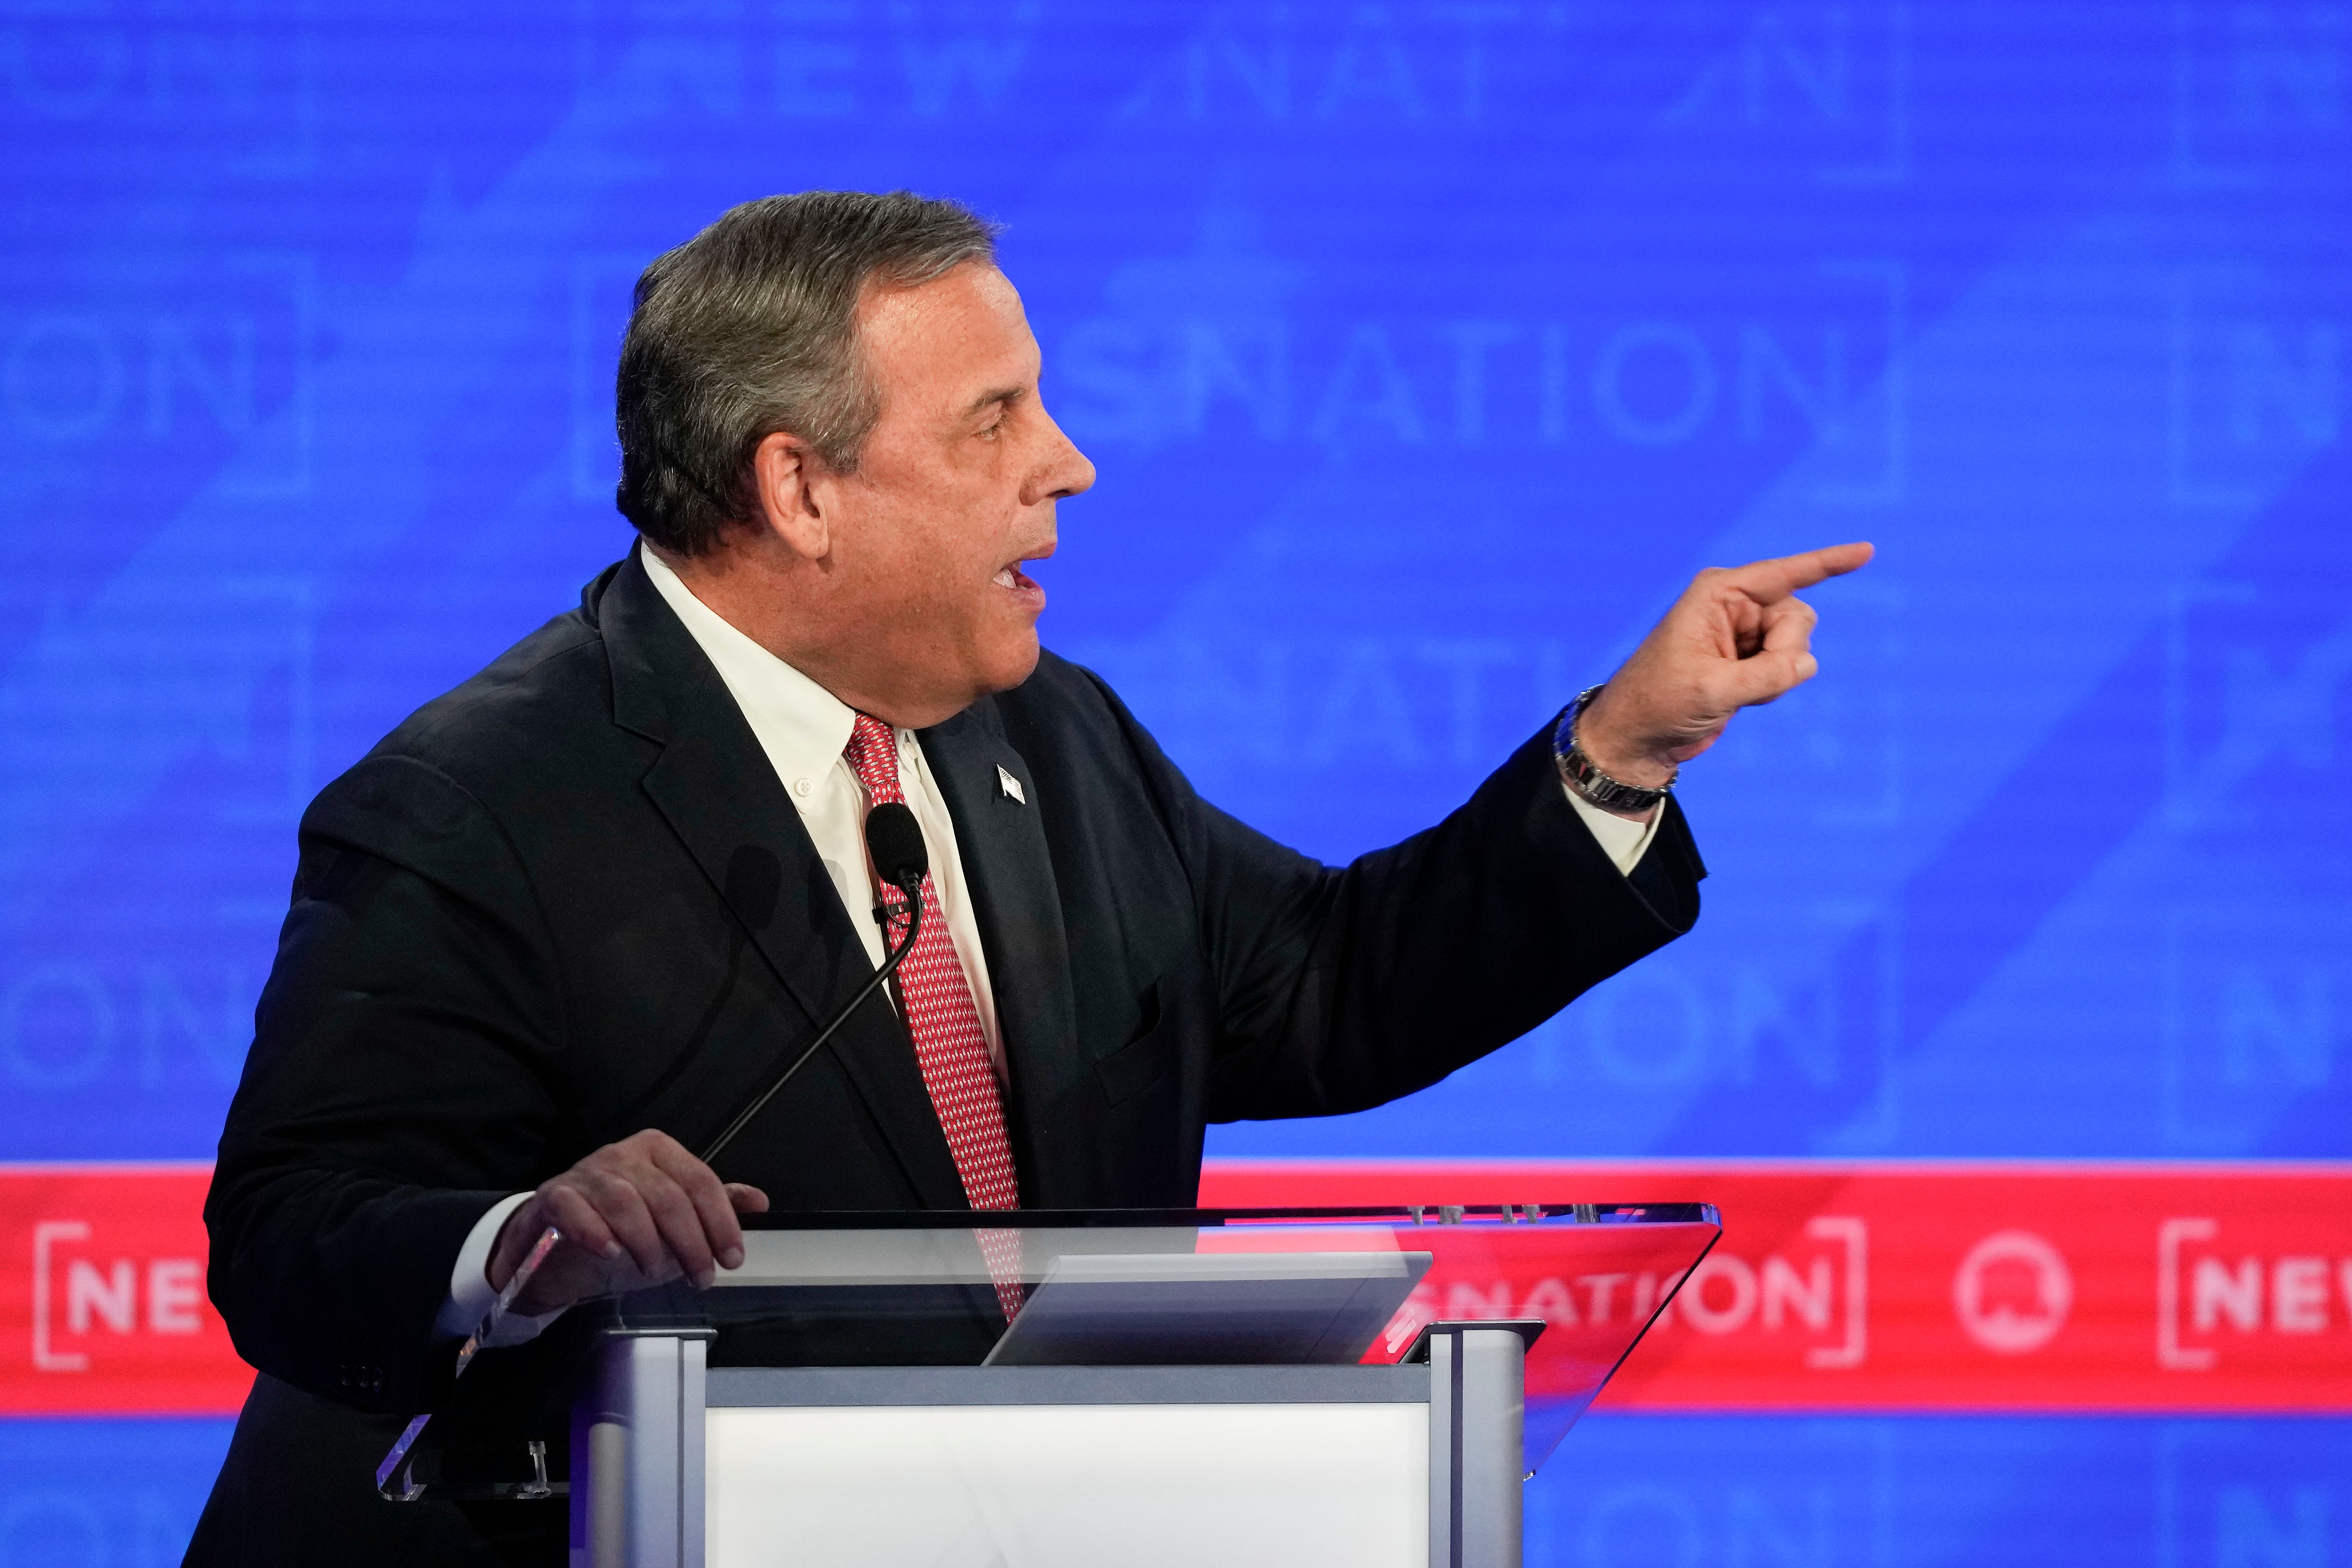 Republican presidential candidate former New Jersey Gov. Chris Christie, gesturing towards businessman Vivek Ramaswamy during the Republican presidential primary debate